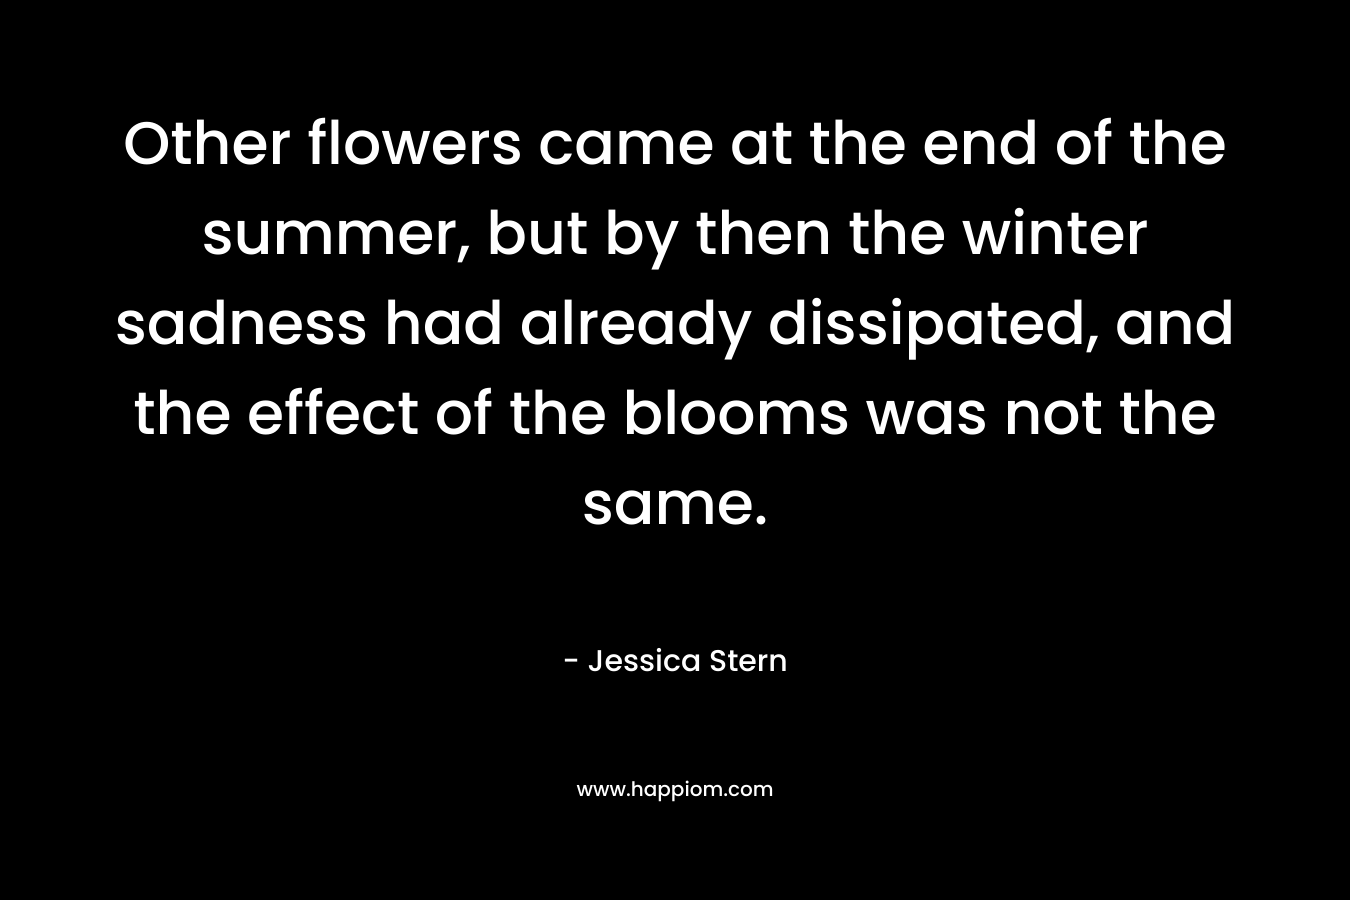 Other flowers came at the end of the summer, but by then the winter sadness had already dissipated, and the effect of the blooms was not the same. – Jessica Stern